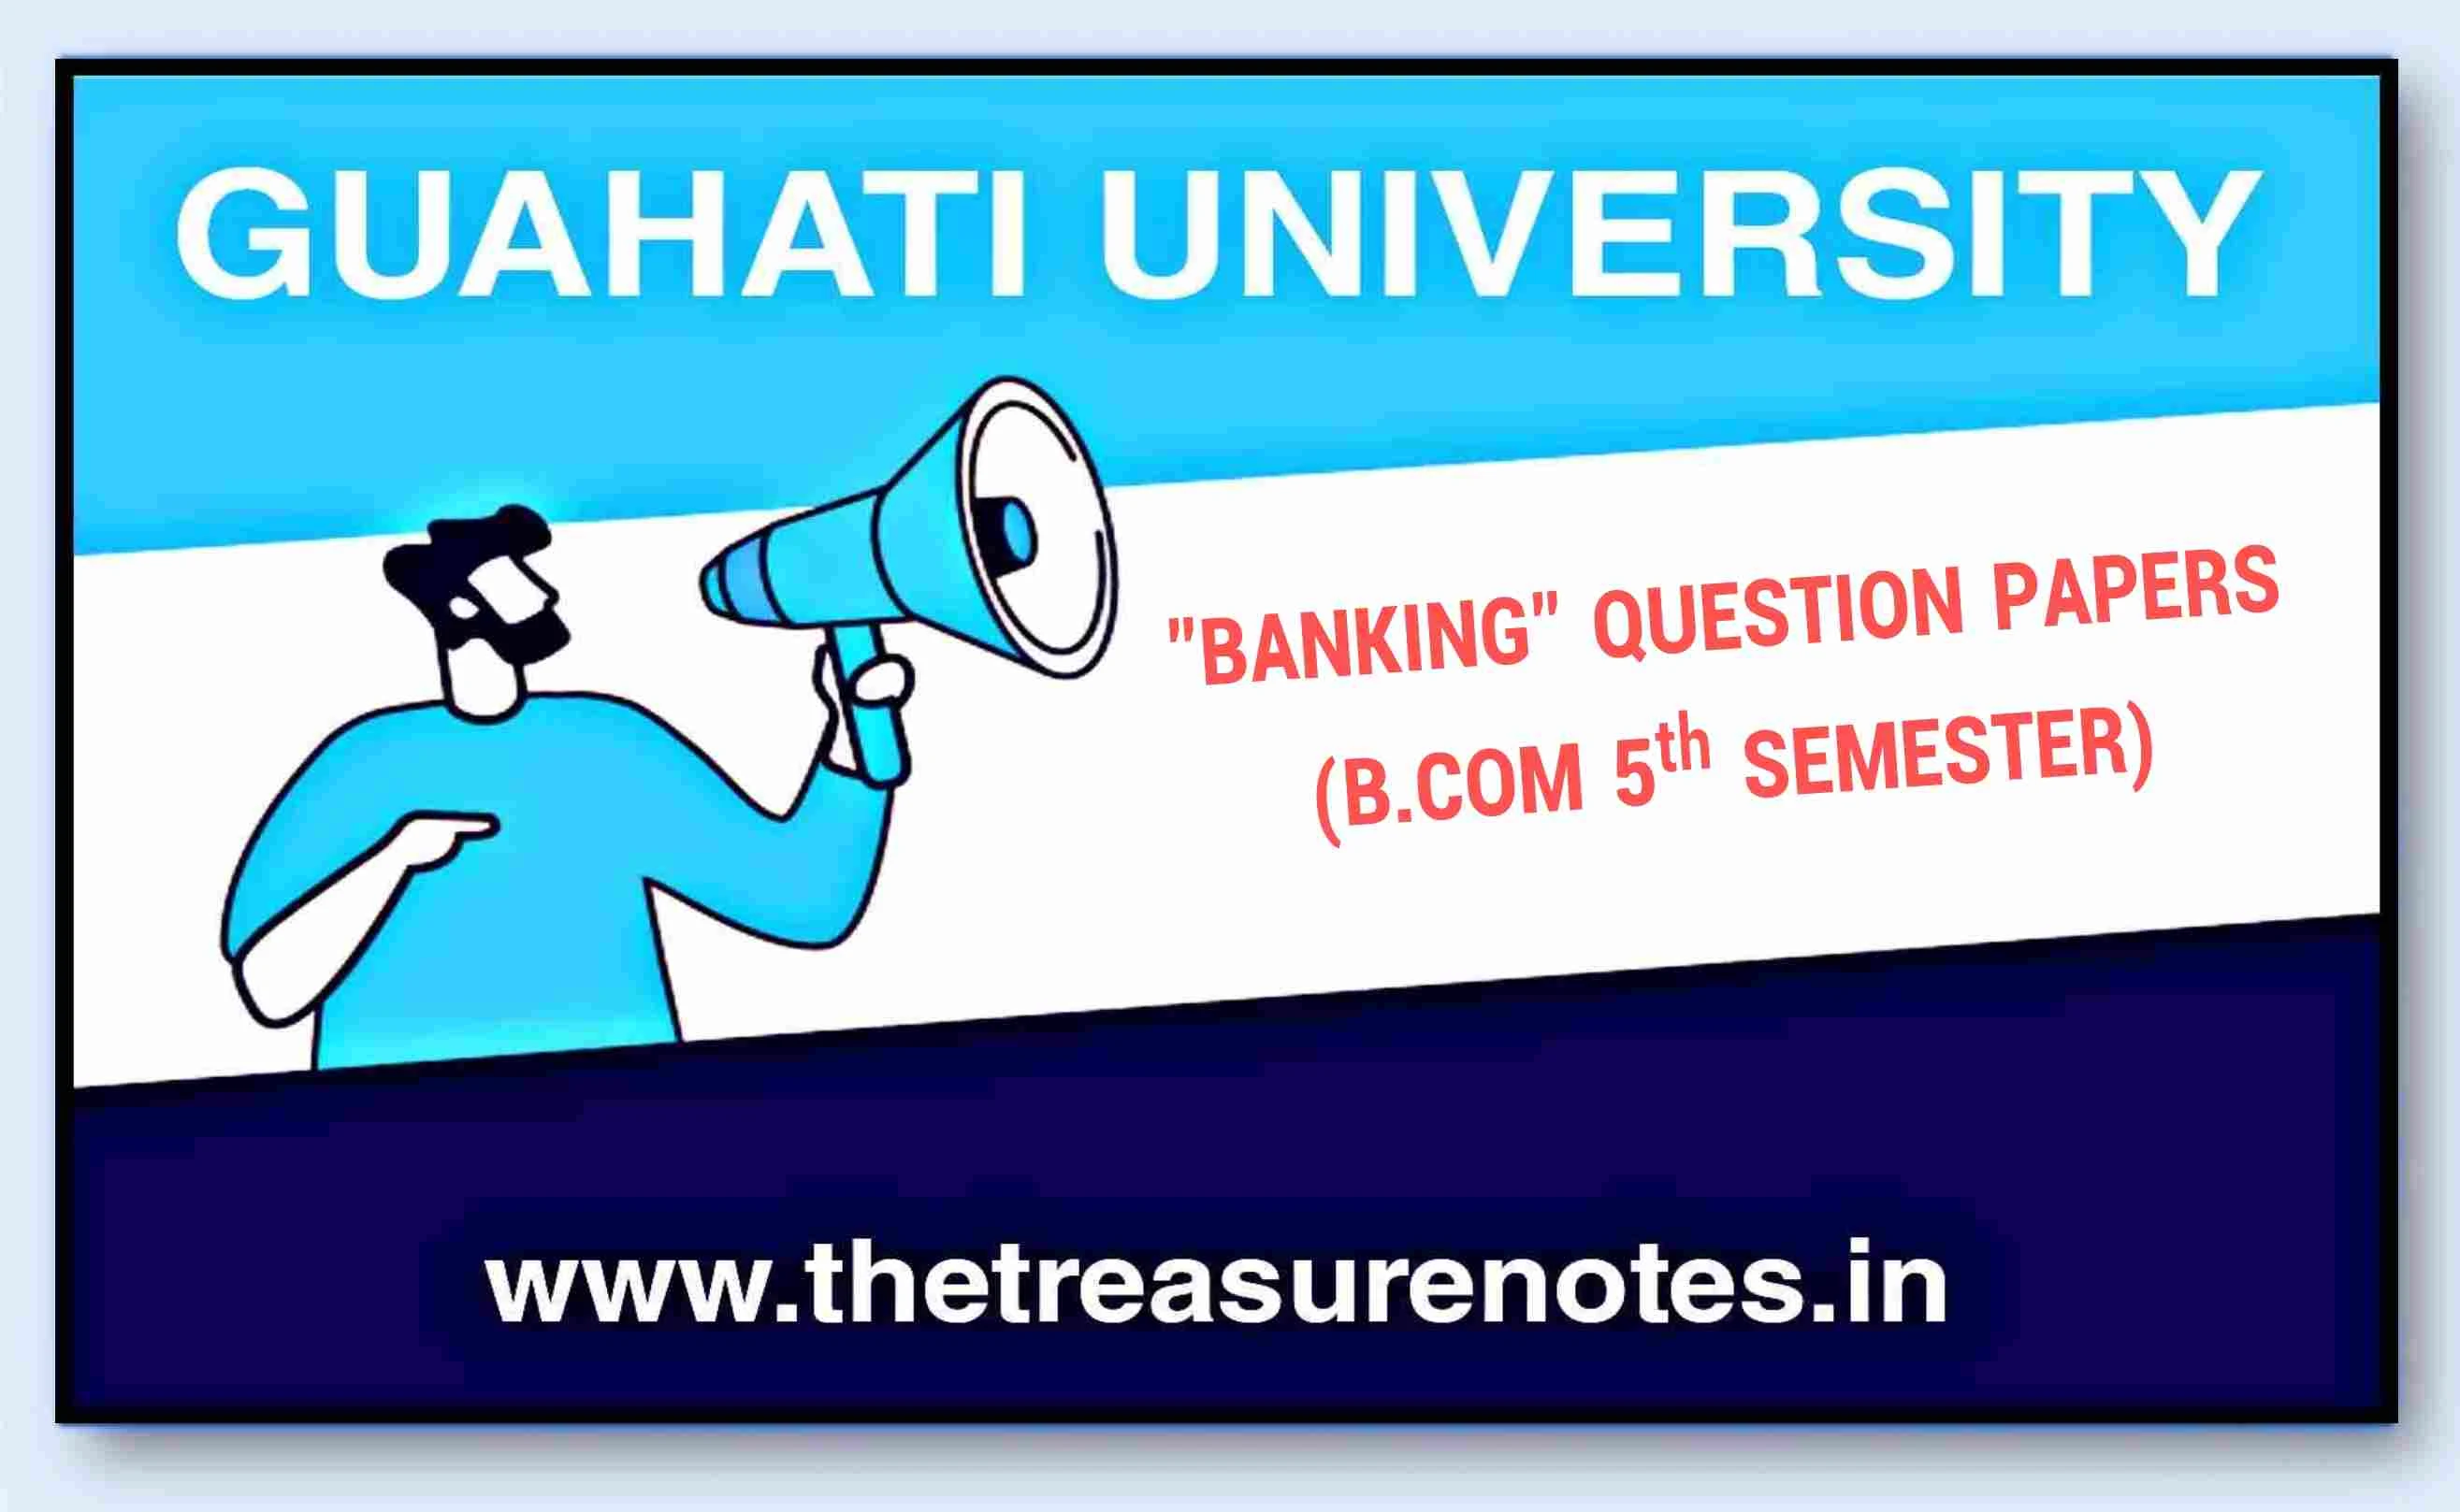 Gauhati University Banking Question Papers bcom 5th semester,Banking Question Paper'2019 B.COM 5th Semester Gauhati University - The Treasure Notes